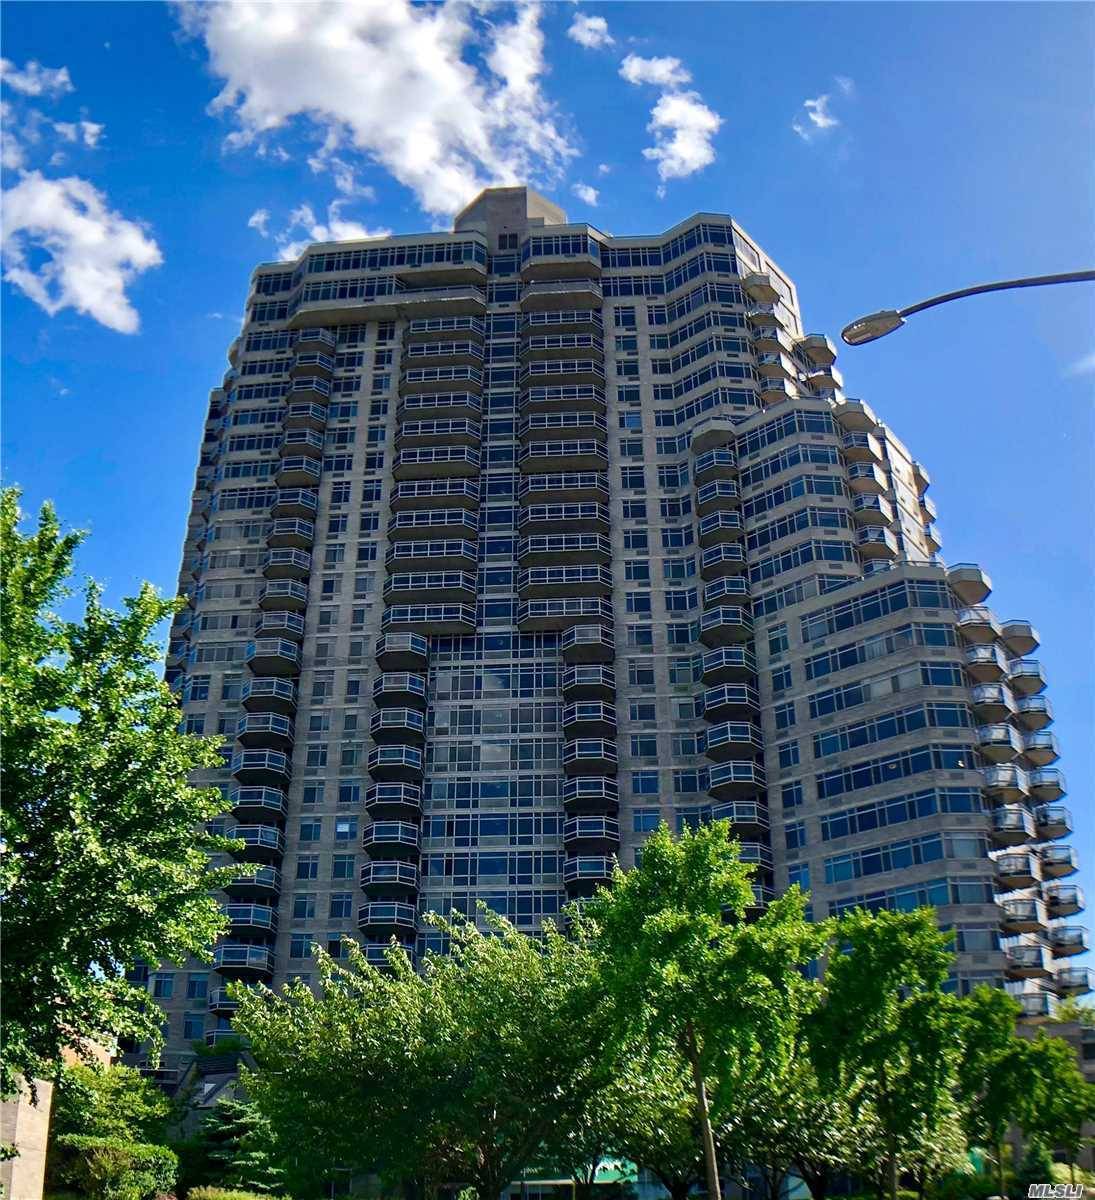 Sunny Spacious 2 Bed 2 Bath Condo On The 19th Floor With A 120 Sf Balcony Overlooking Forest Hills Gardens And Manhattan Skyline.